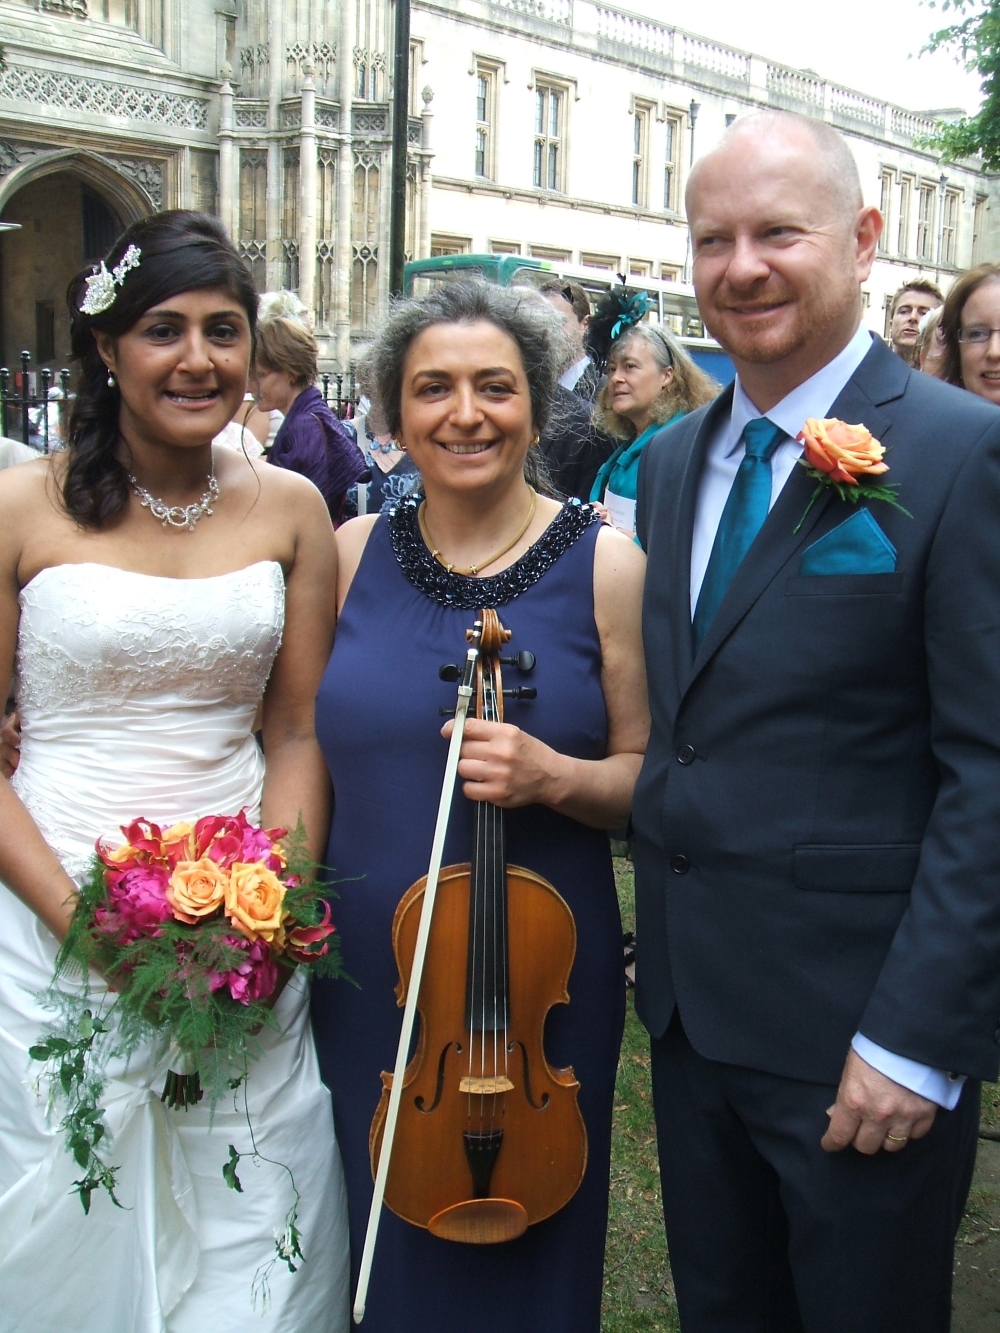 Wedding musician in Oxford with viola for another ceremony and reception. In the background is Christ Church Cathedral